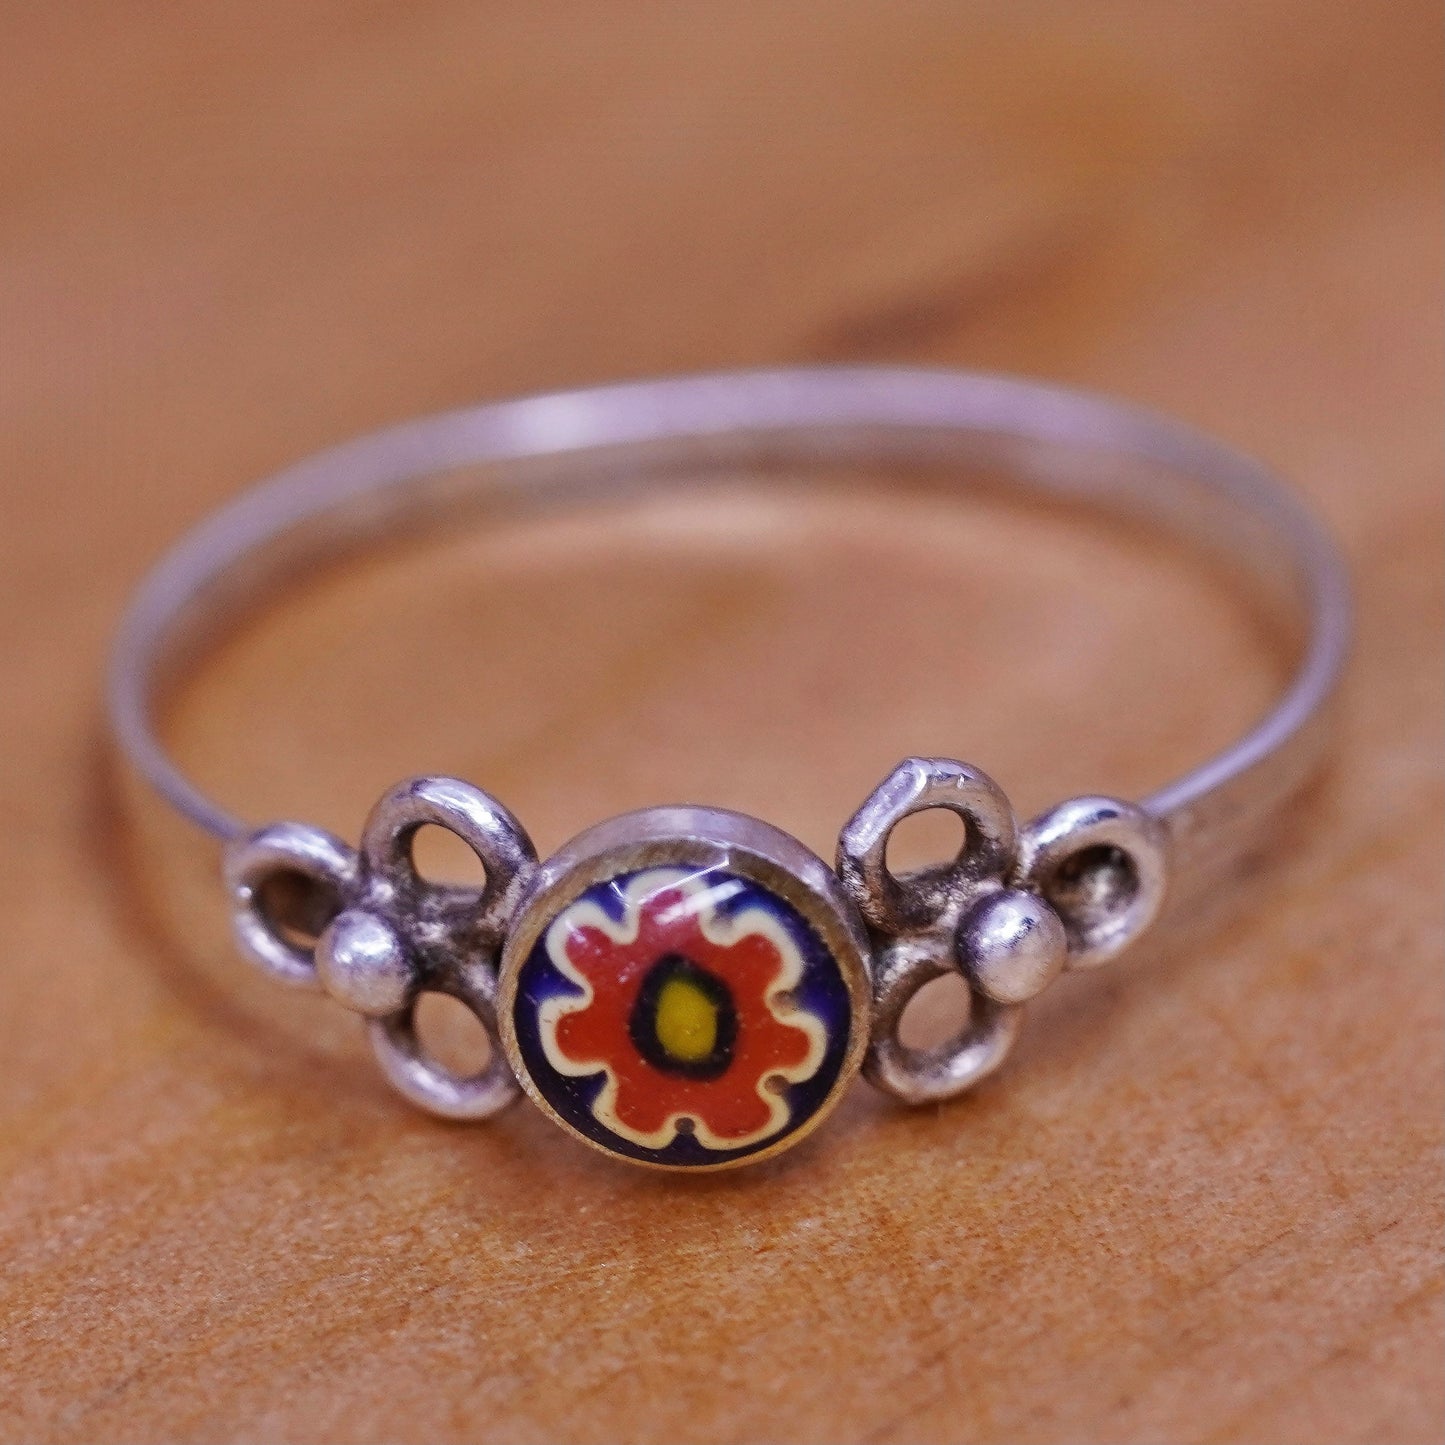 Size 6, Sterling silver handmade ring, southwestern 925 band with flower glass